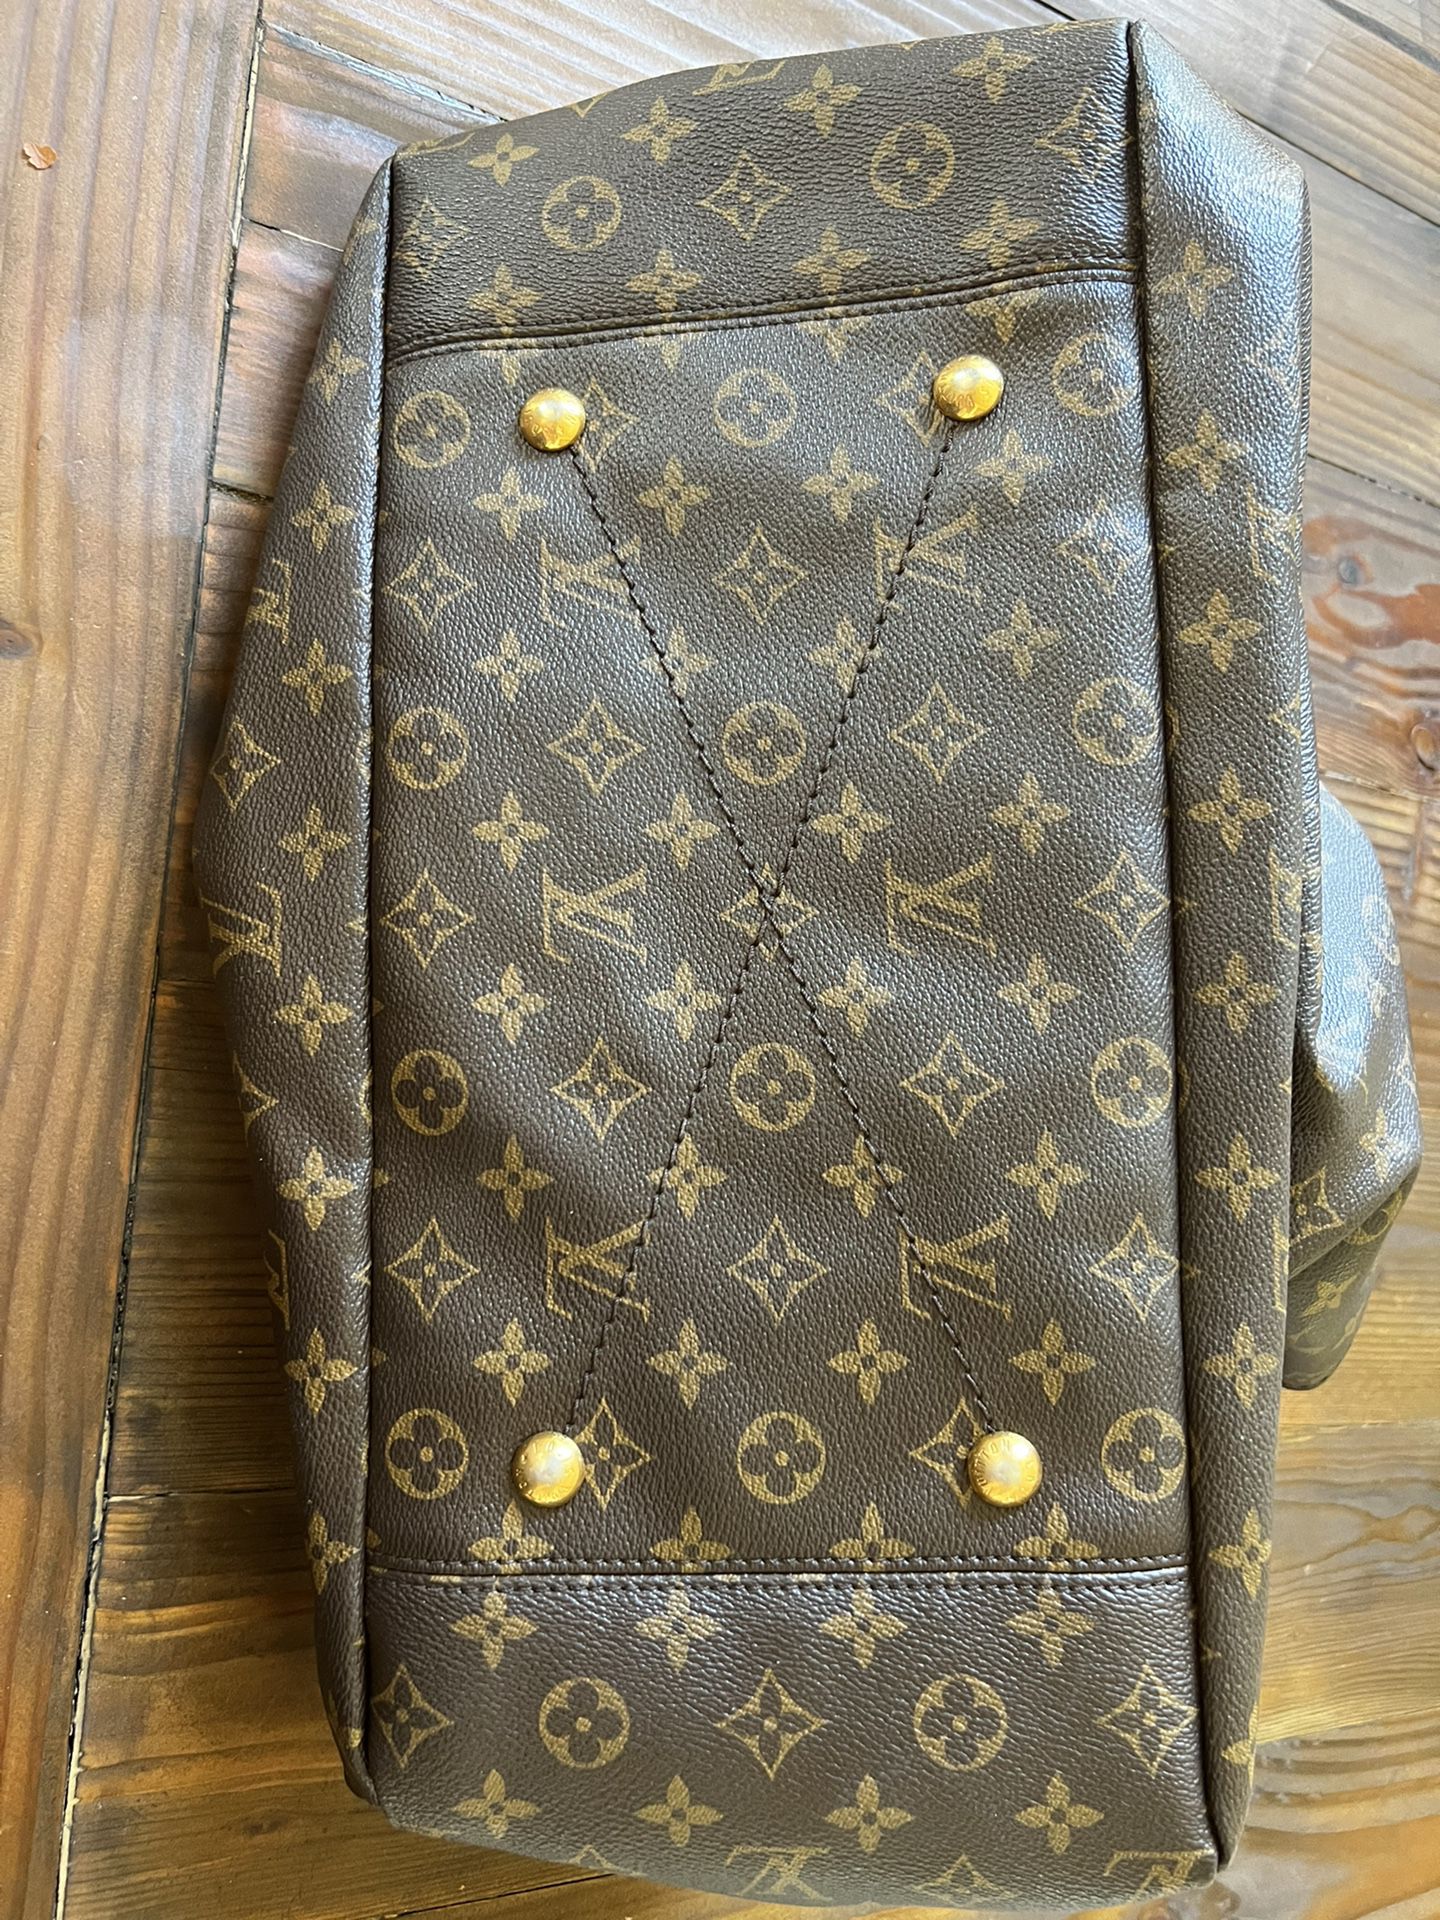 Louis Vuitton Artsy Bag for Sale in West Covina, CA - OfferUp